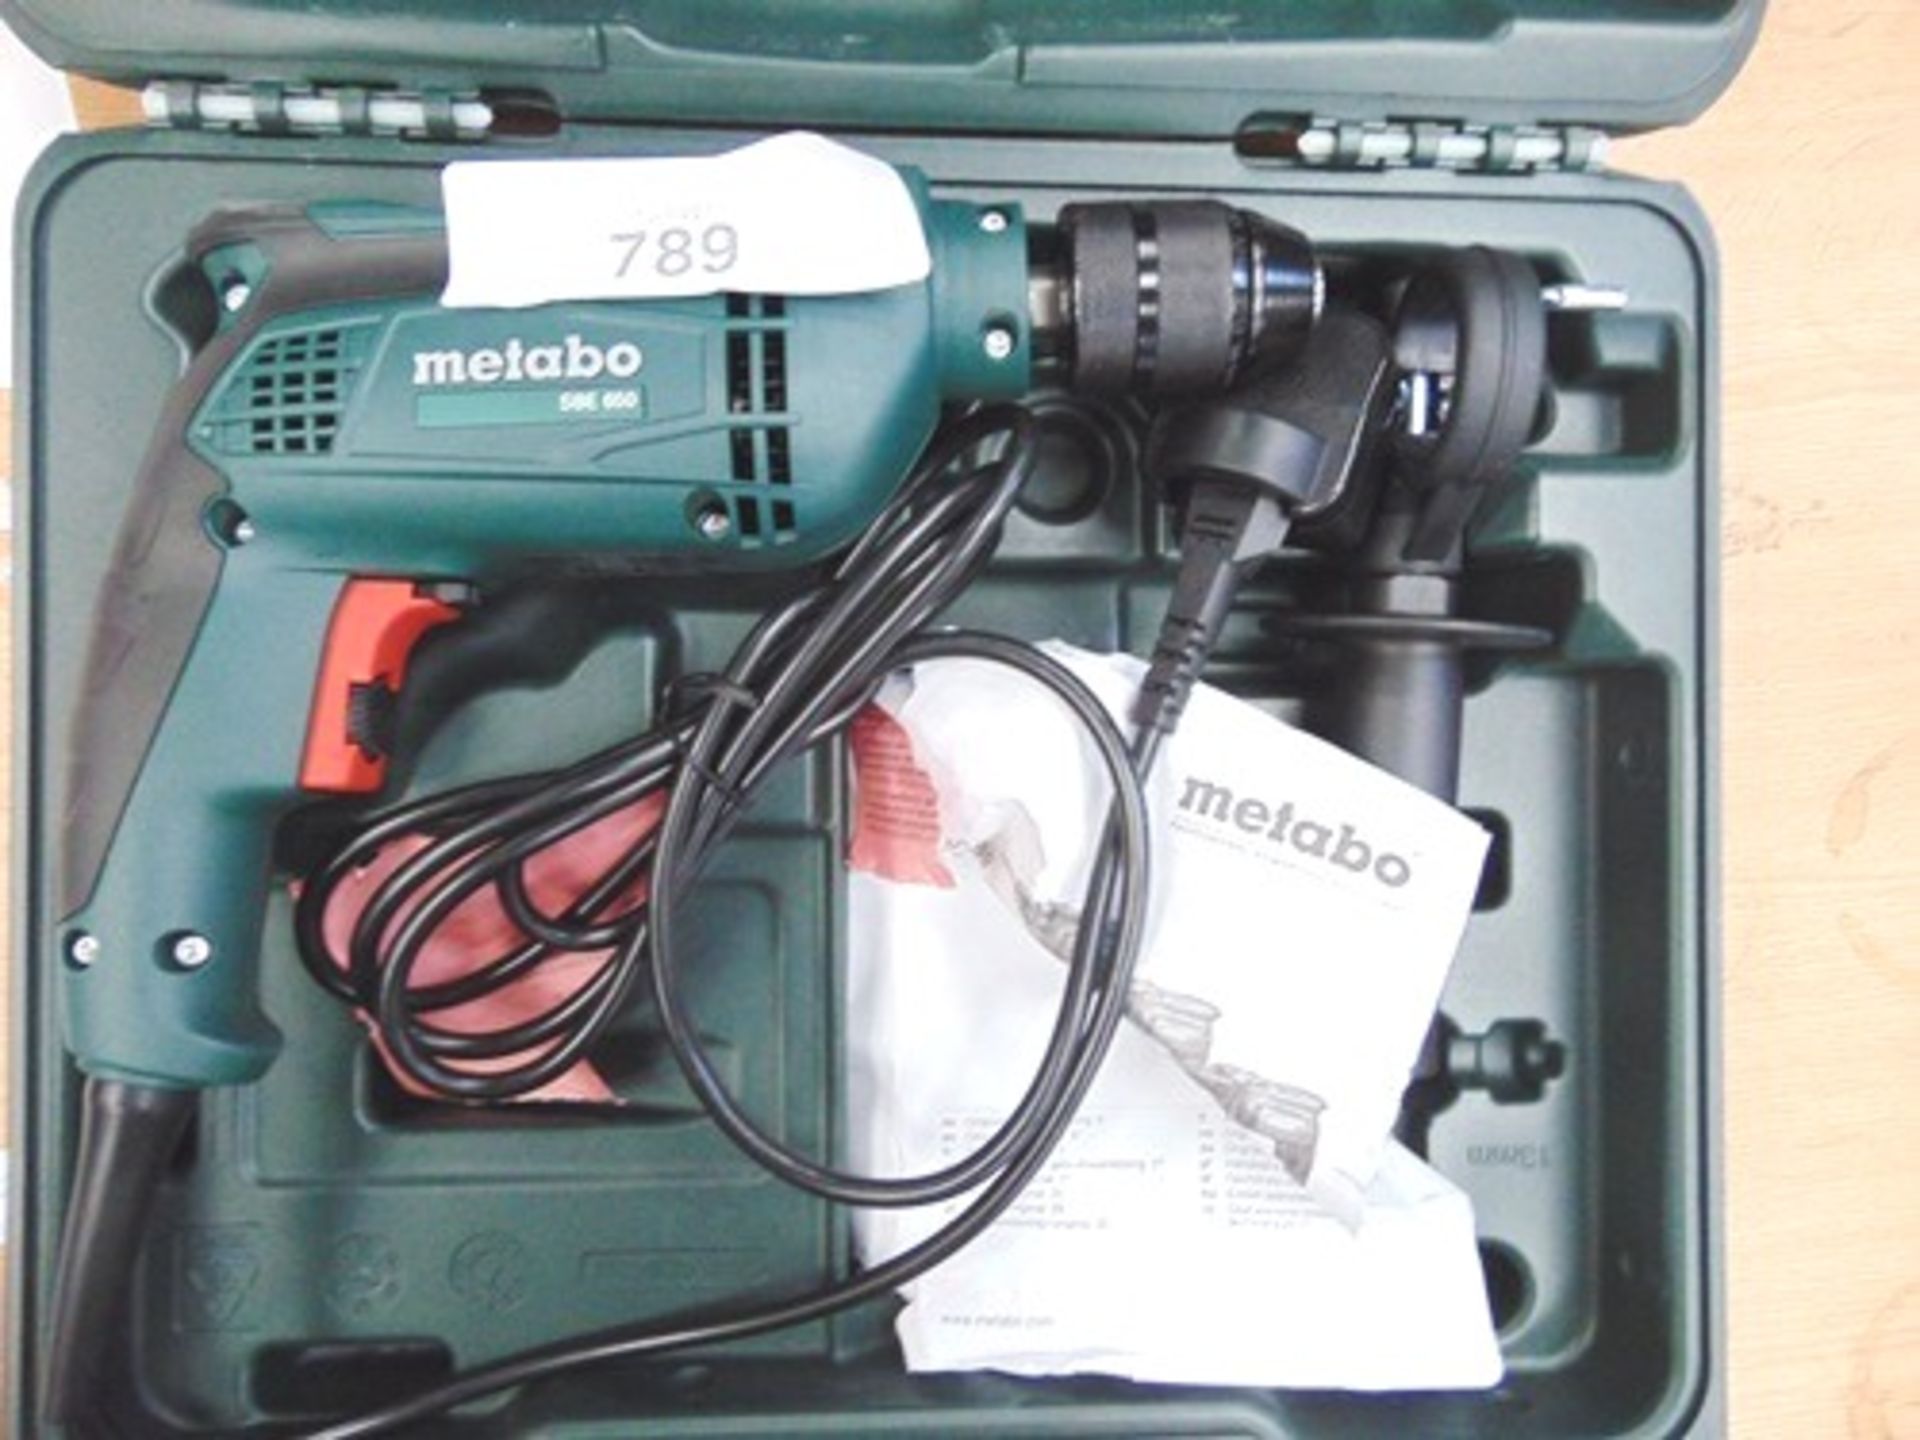 1 x Metabo corded hammer drill, Model SBE650, 650W, powers on - (Grade B) (ES17) - Image 2 of 2